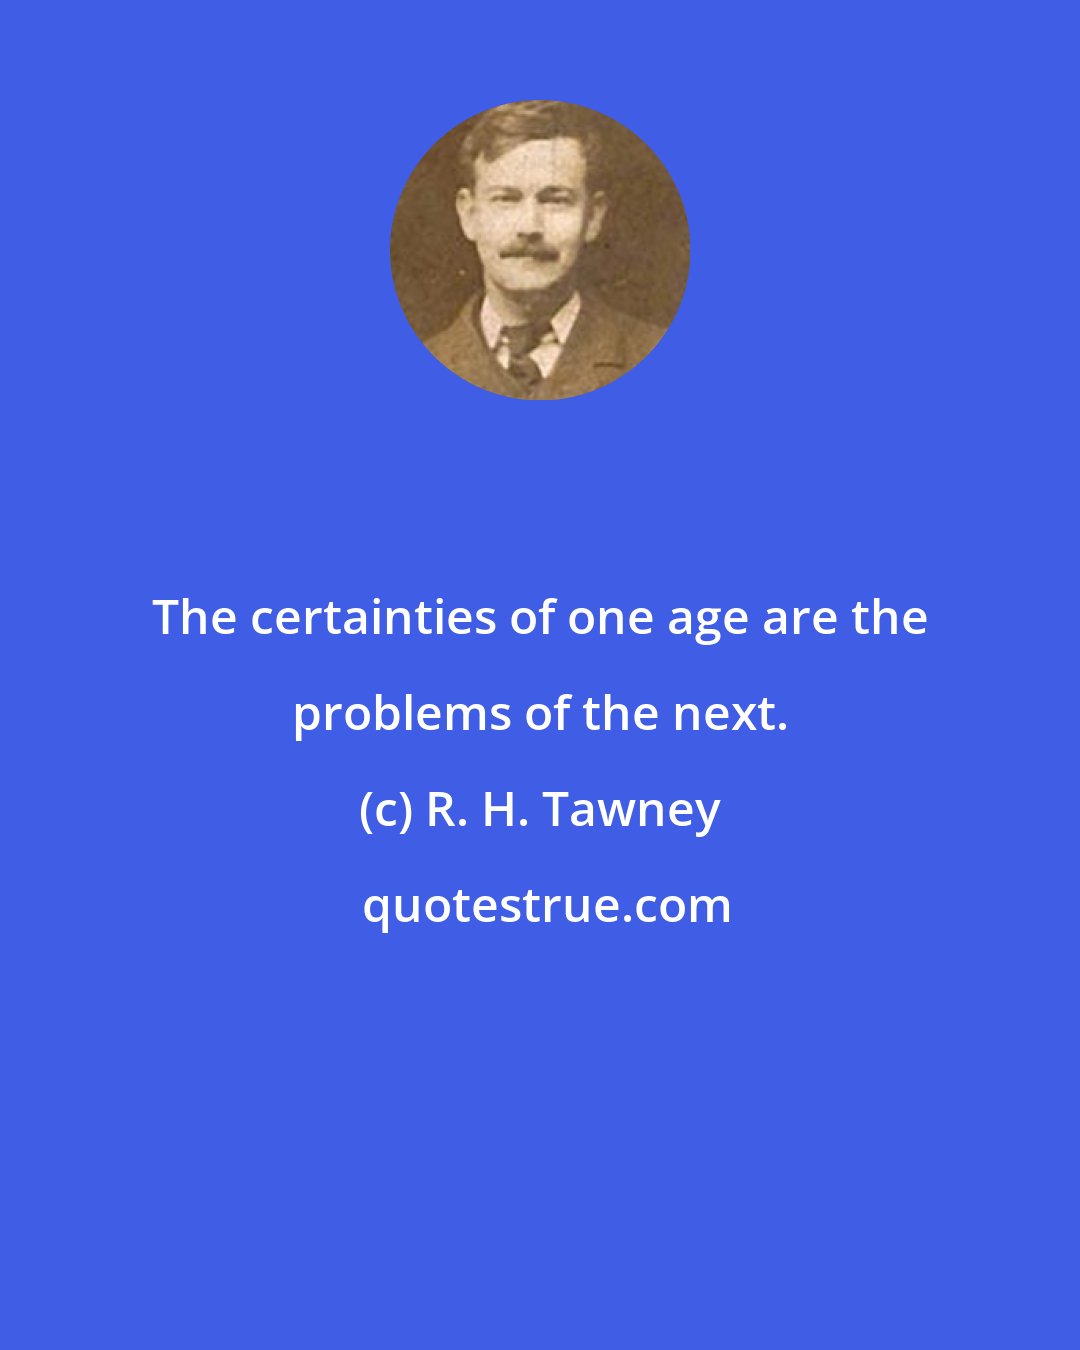 R. H. Tawney: The certainties of one age are the problems of the next.